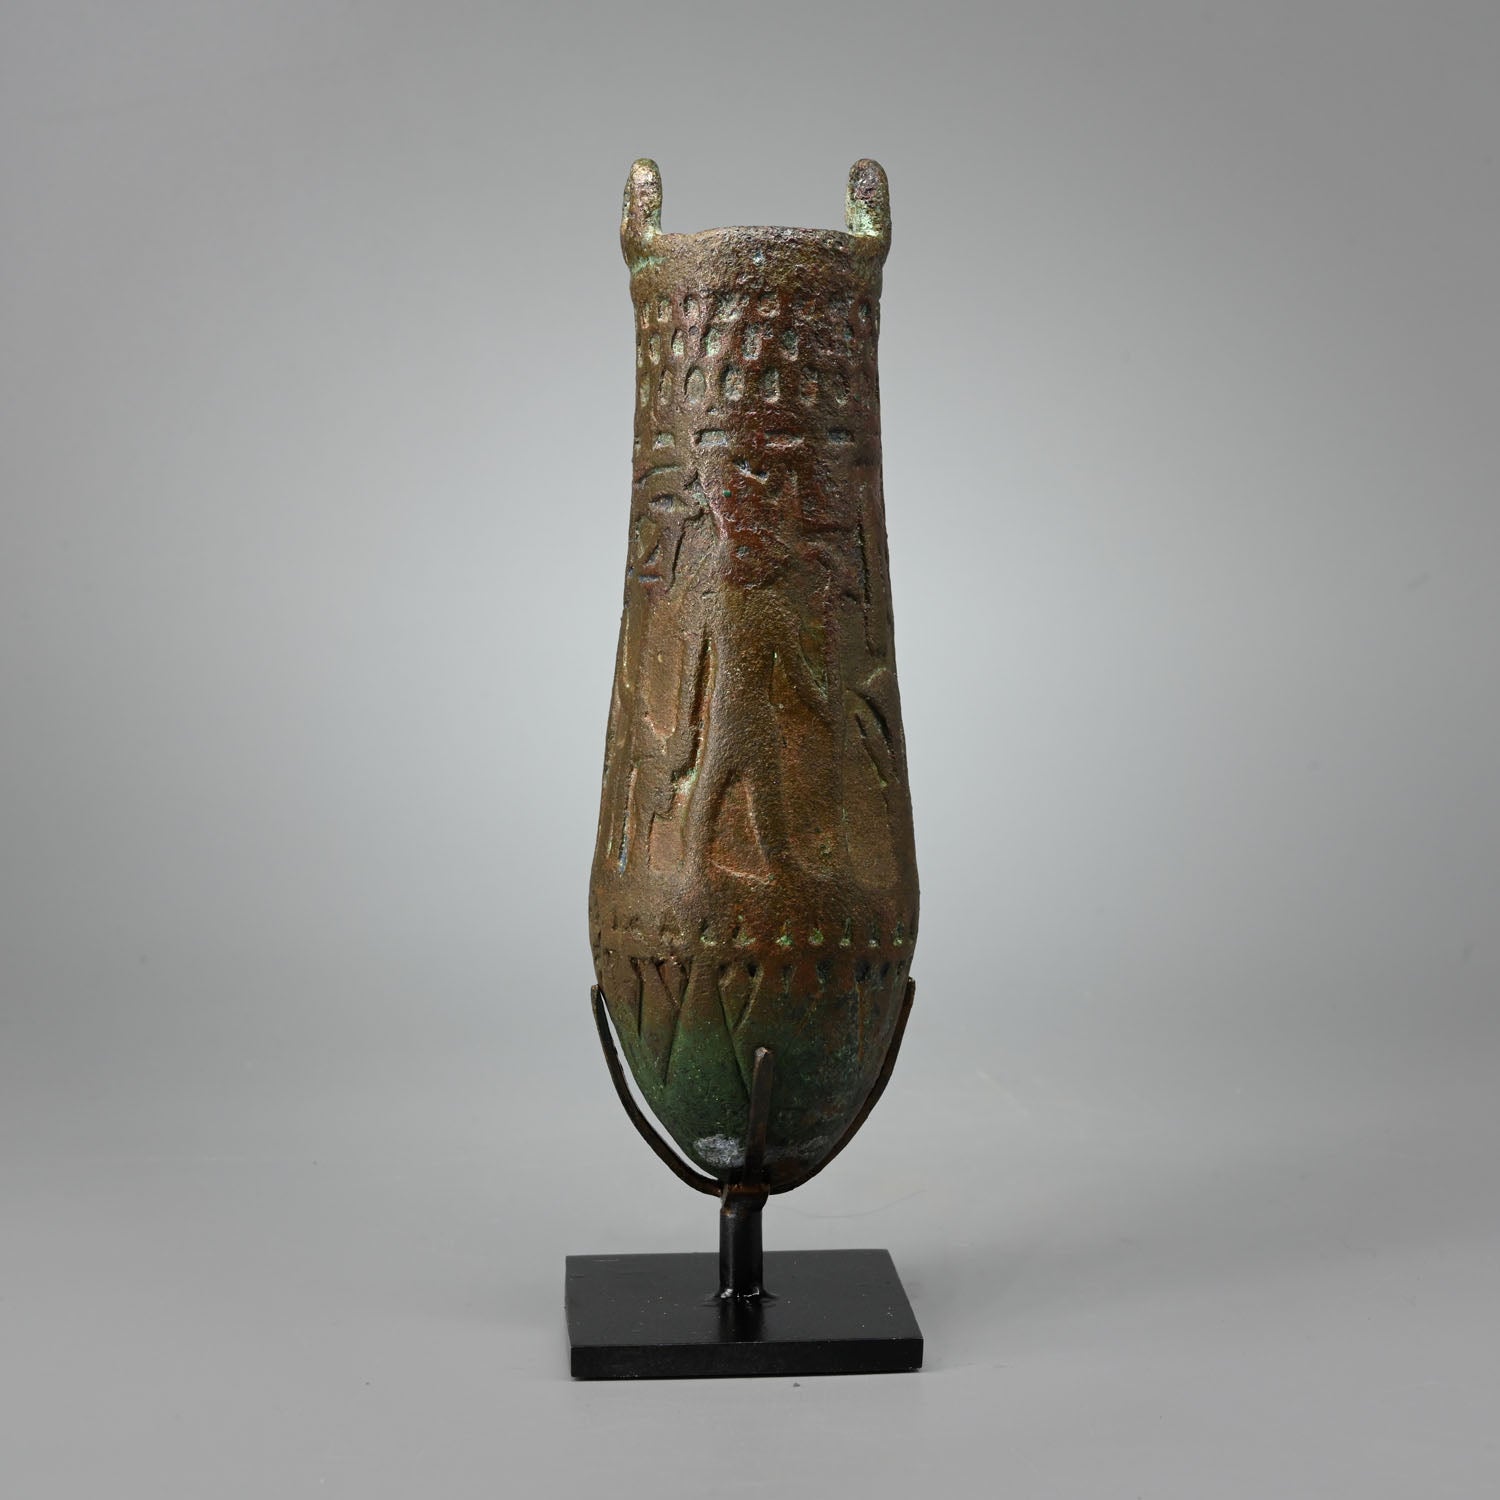 An Egyptian Bronze Situla, Early Ptolemaic Period, ca. 4th - 3rd century BCE